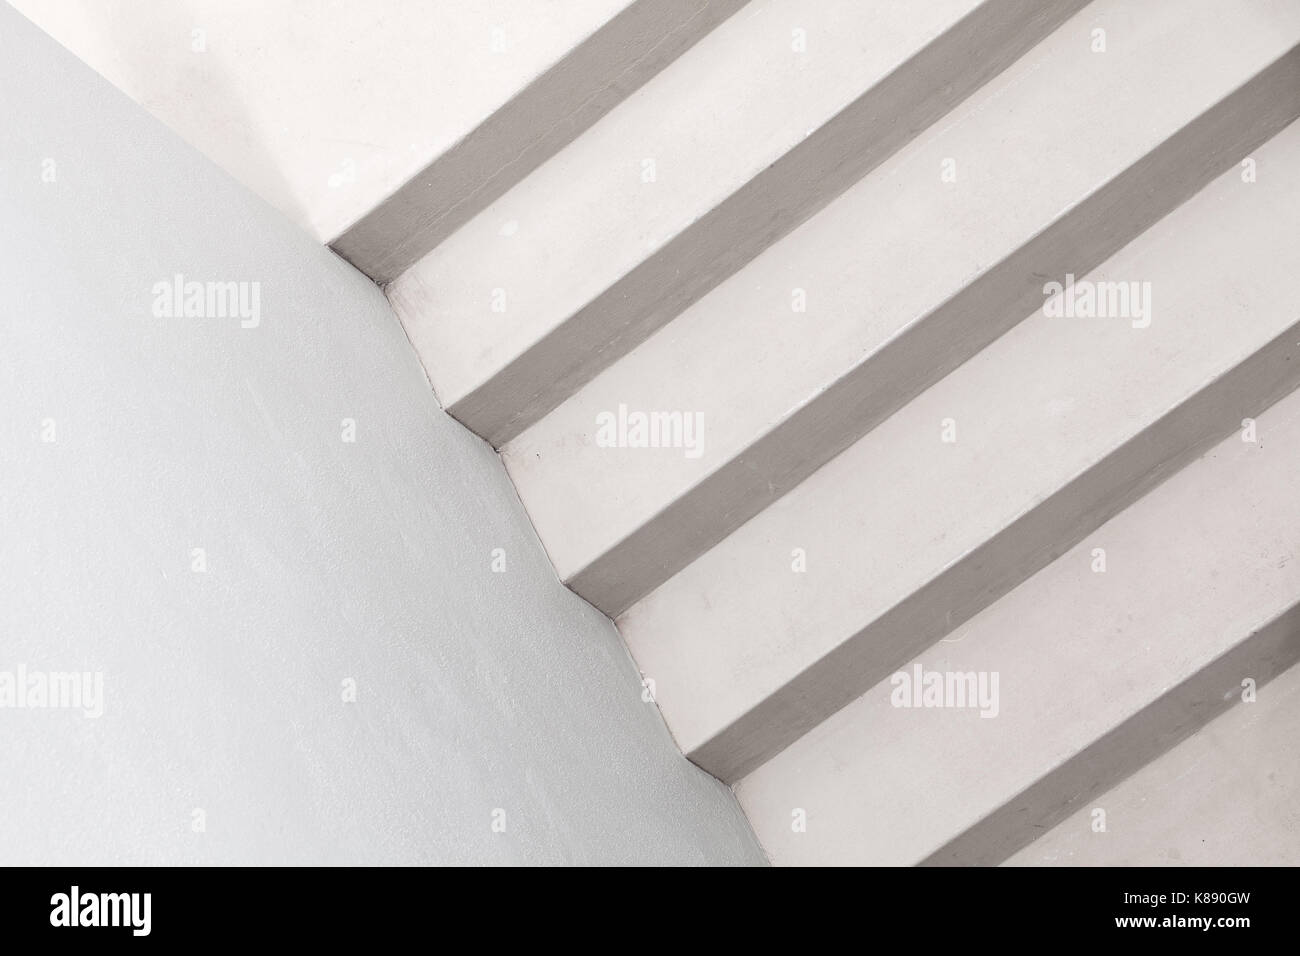 Abstract architecture background photo. White stairs, empty interior details Stock Photo